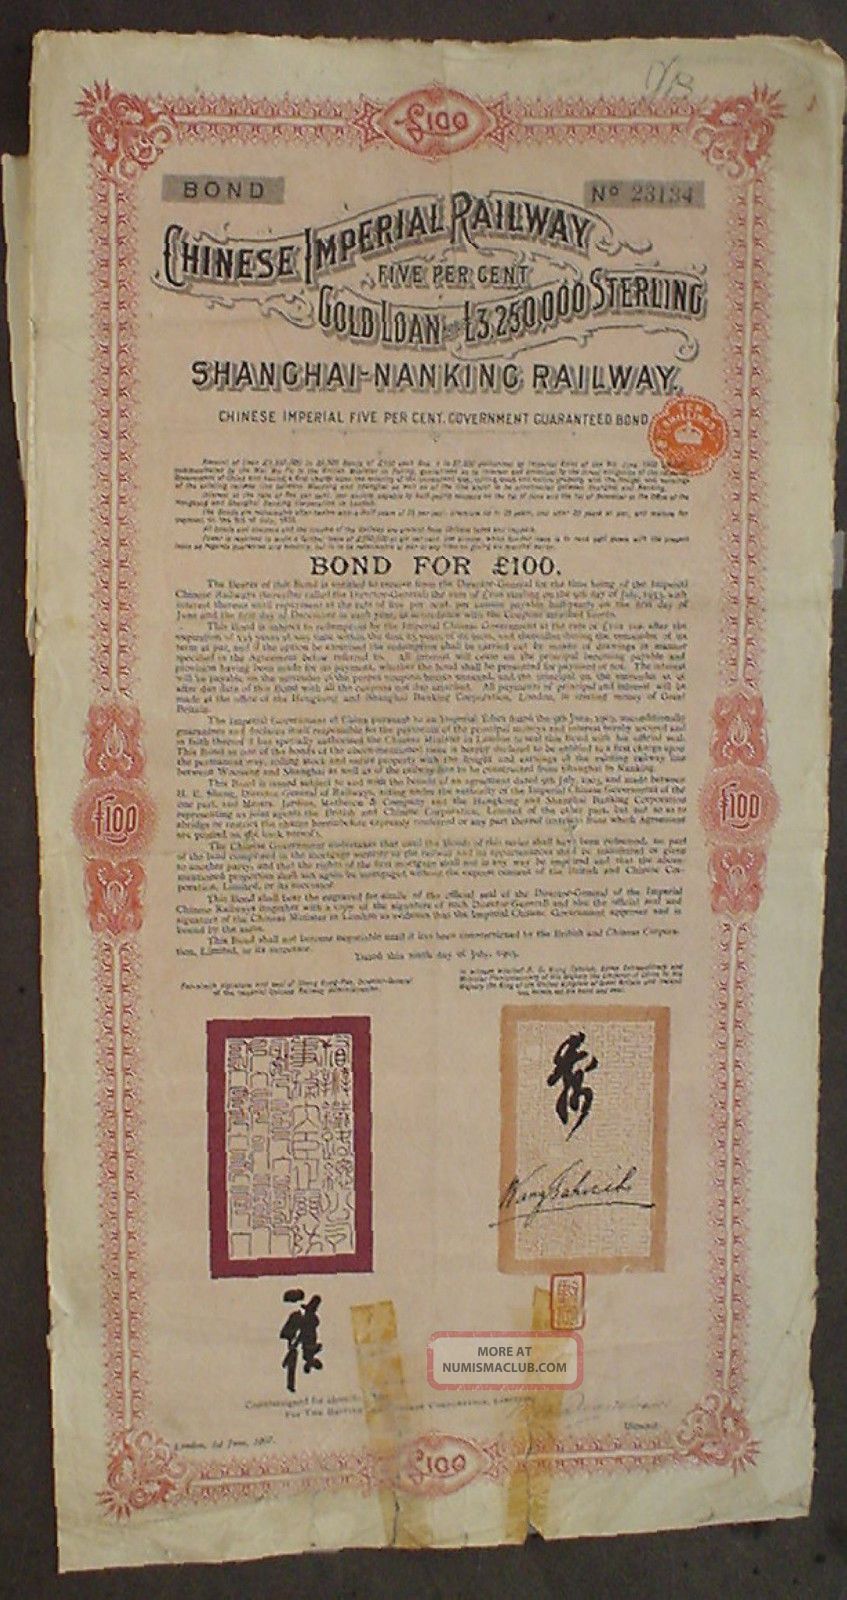 Chinese Imperial Railway Gold Loan Shanghai Nangking 1907 Uncancelled,  Coupons Stocks & Bonds, Scripophily photo